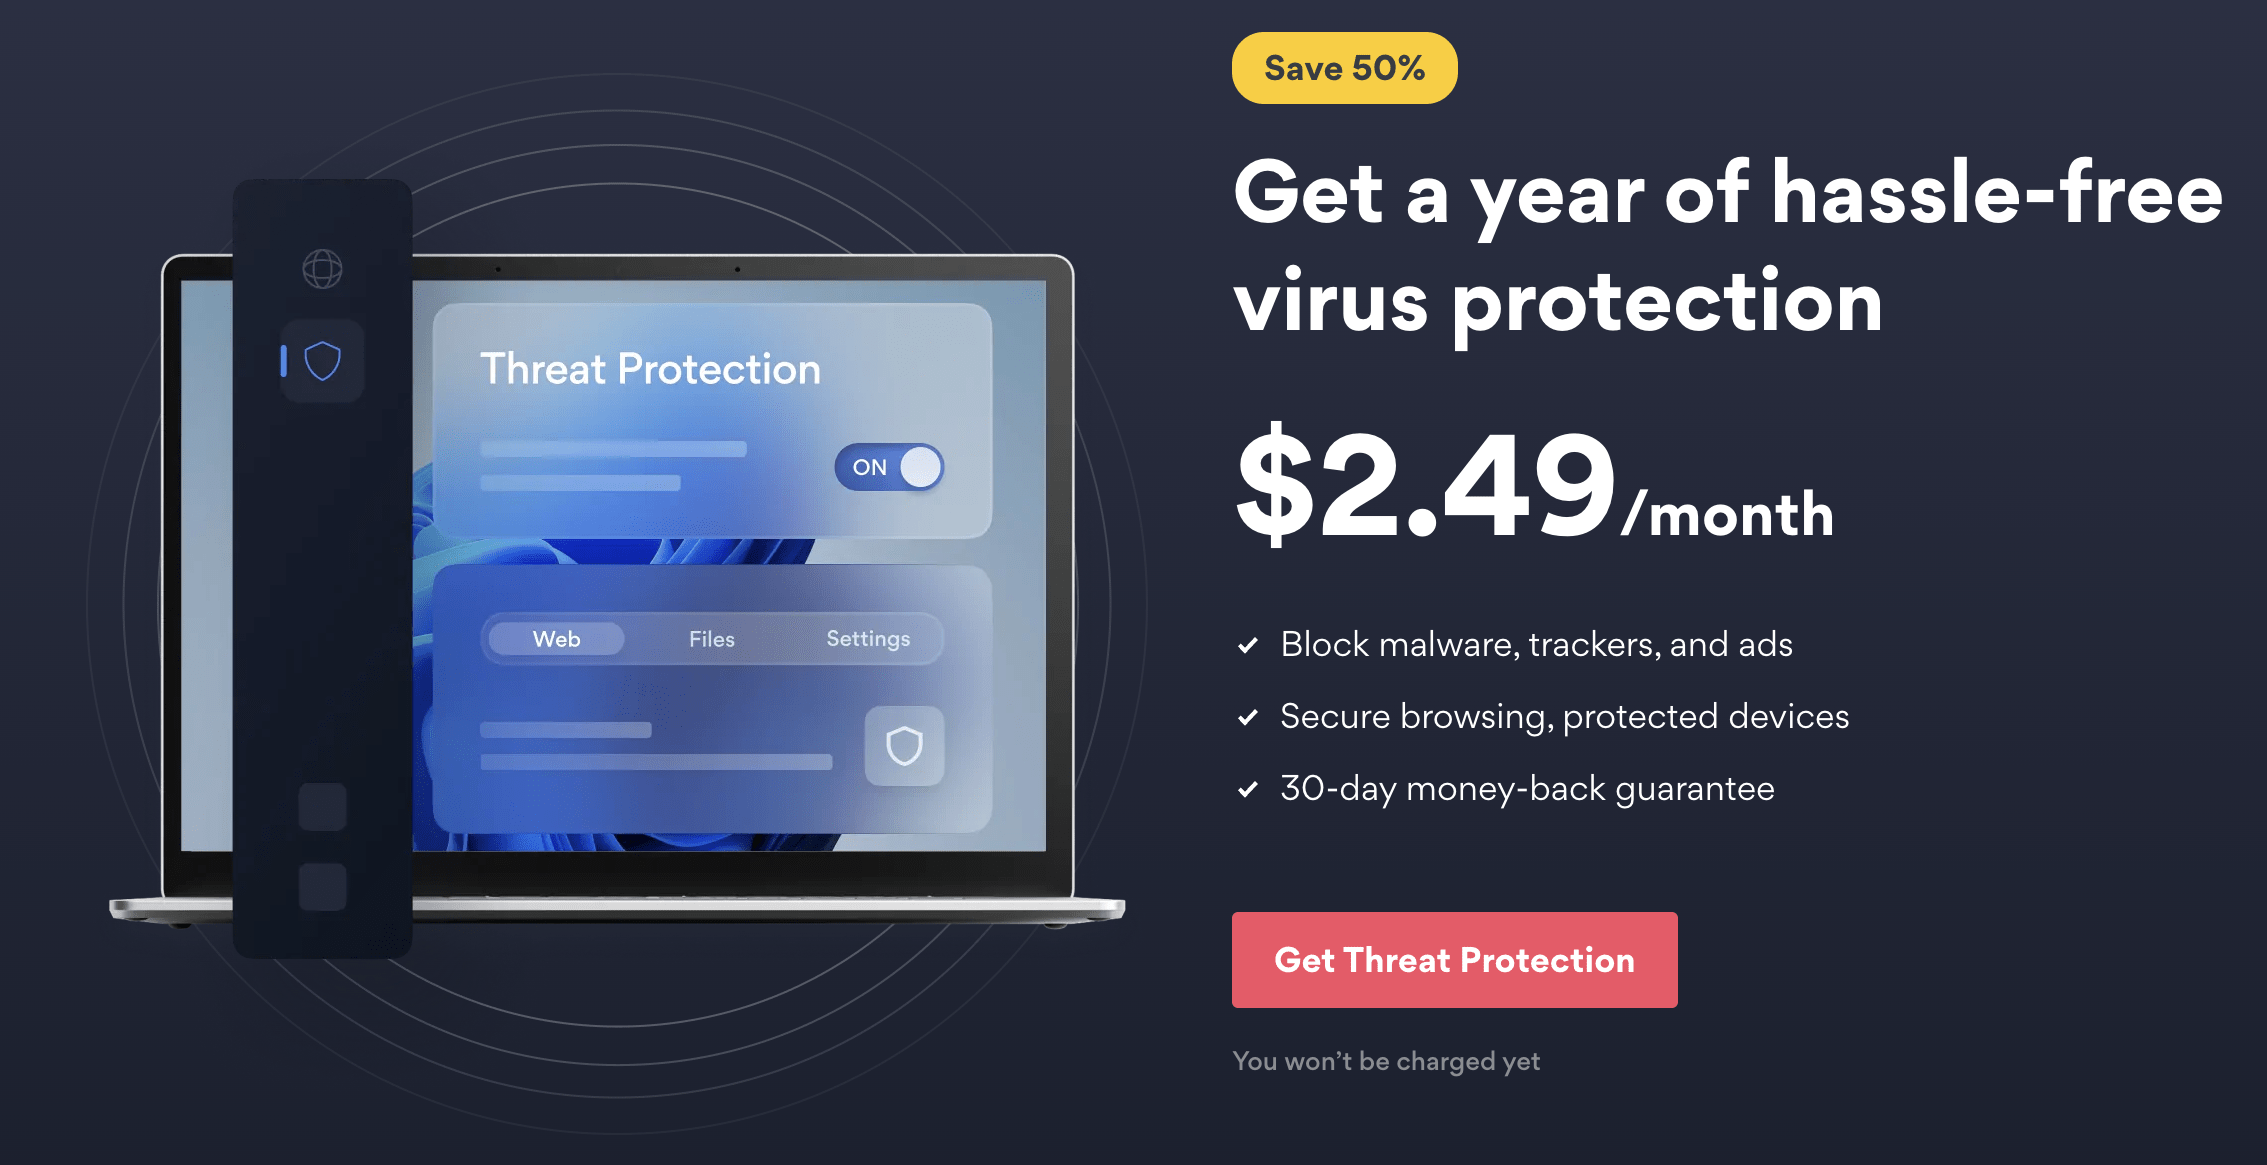 Get 50% OFF Thread Protection!